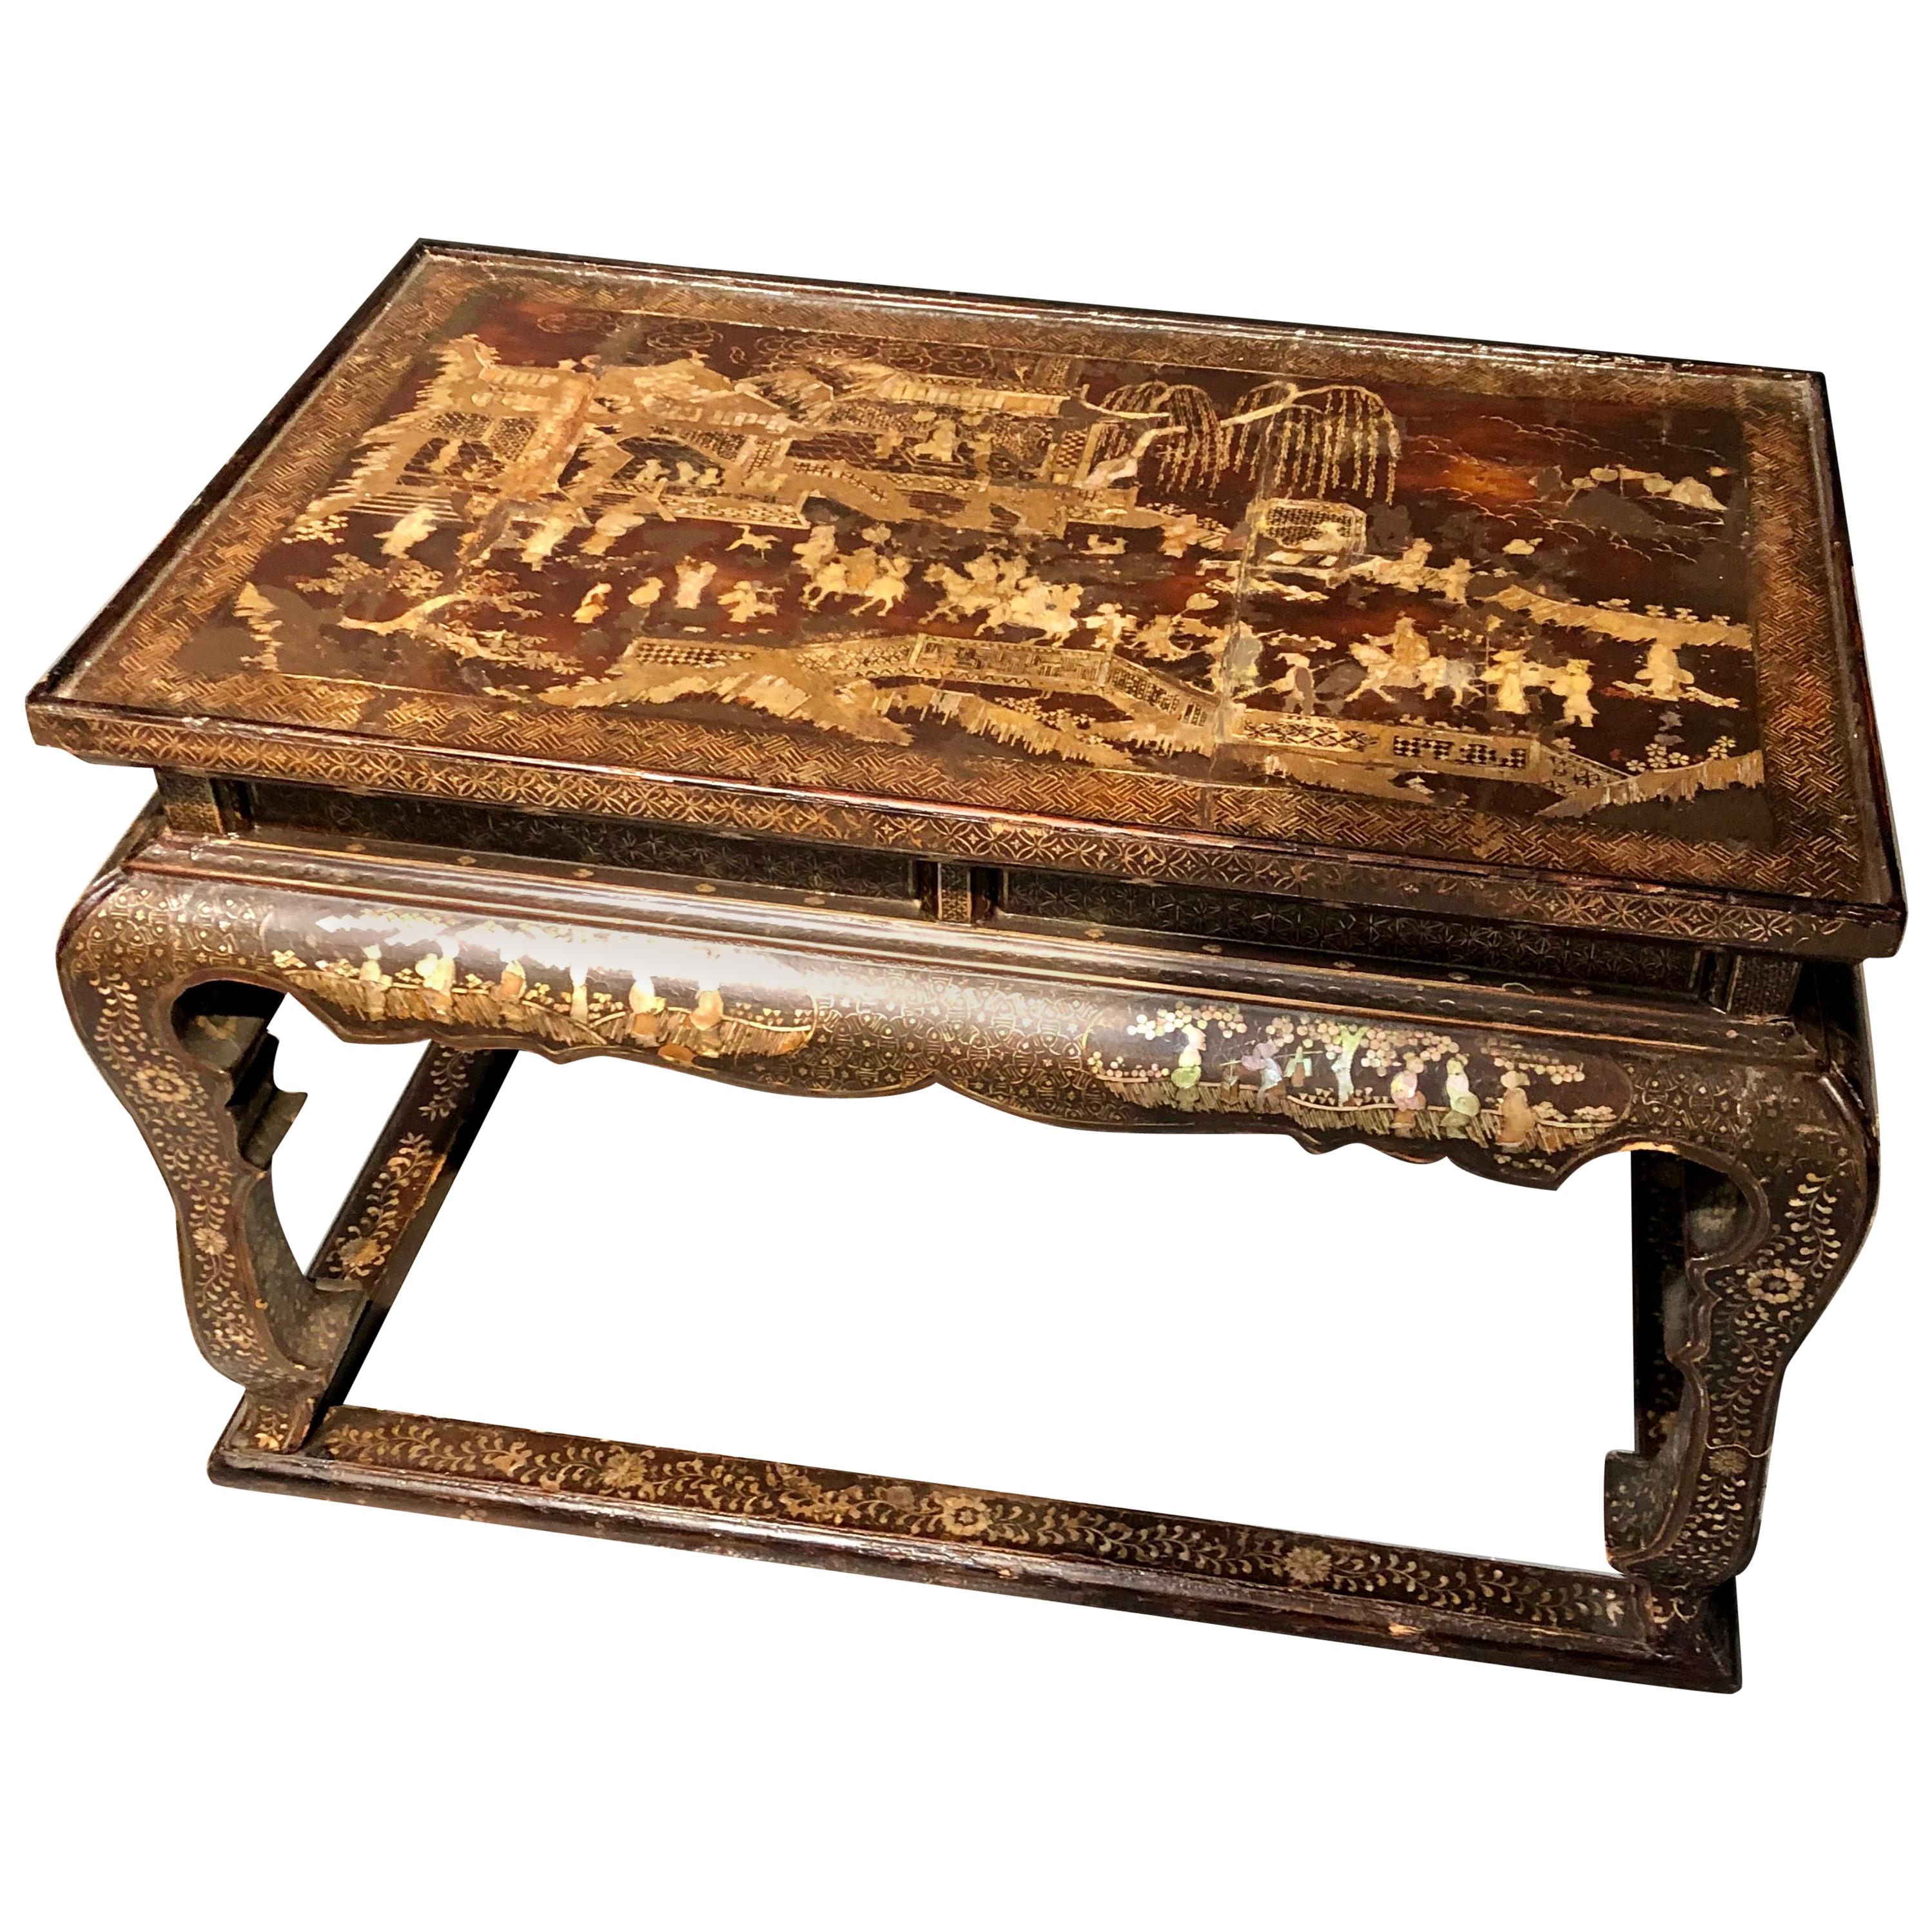 Early 19th Century Chinoiserie Decorated Side, Coffee Table or Stool